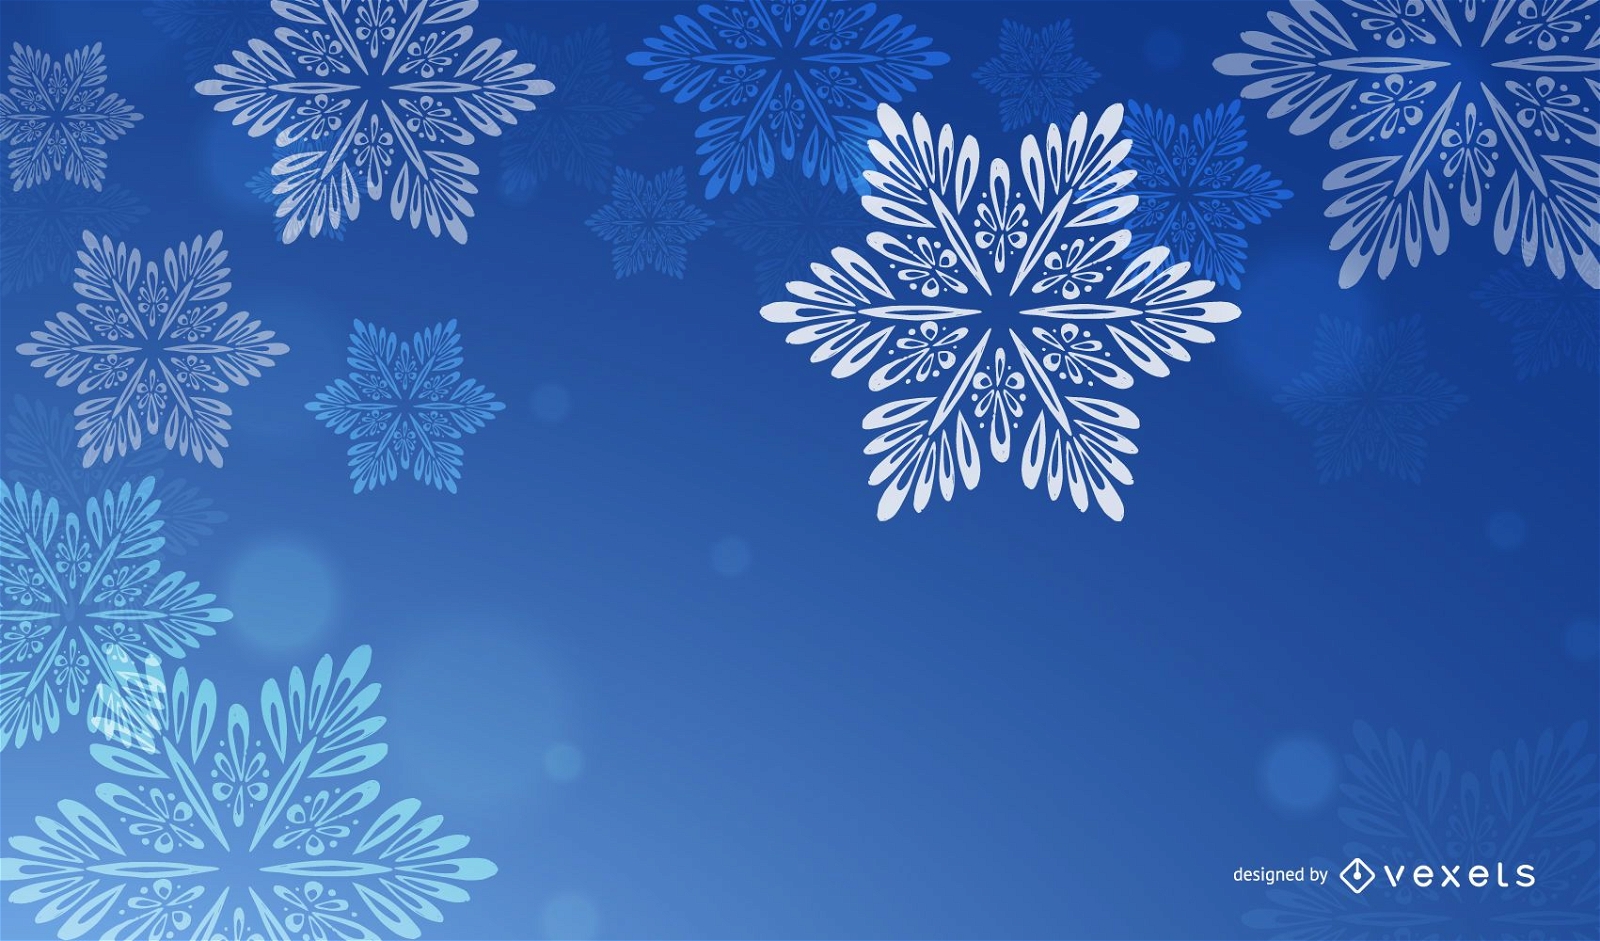 Blue Christmas Background With White Snowflakes Vector Download